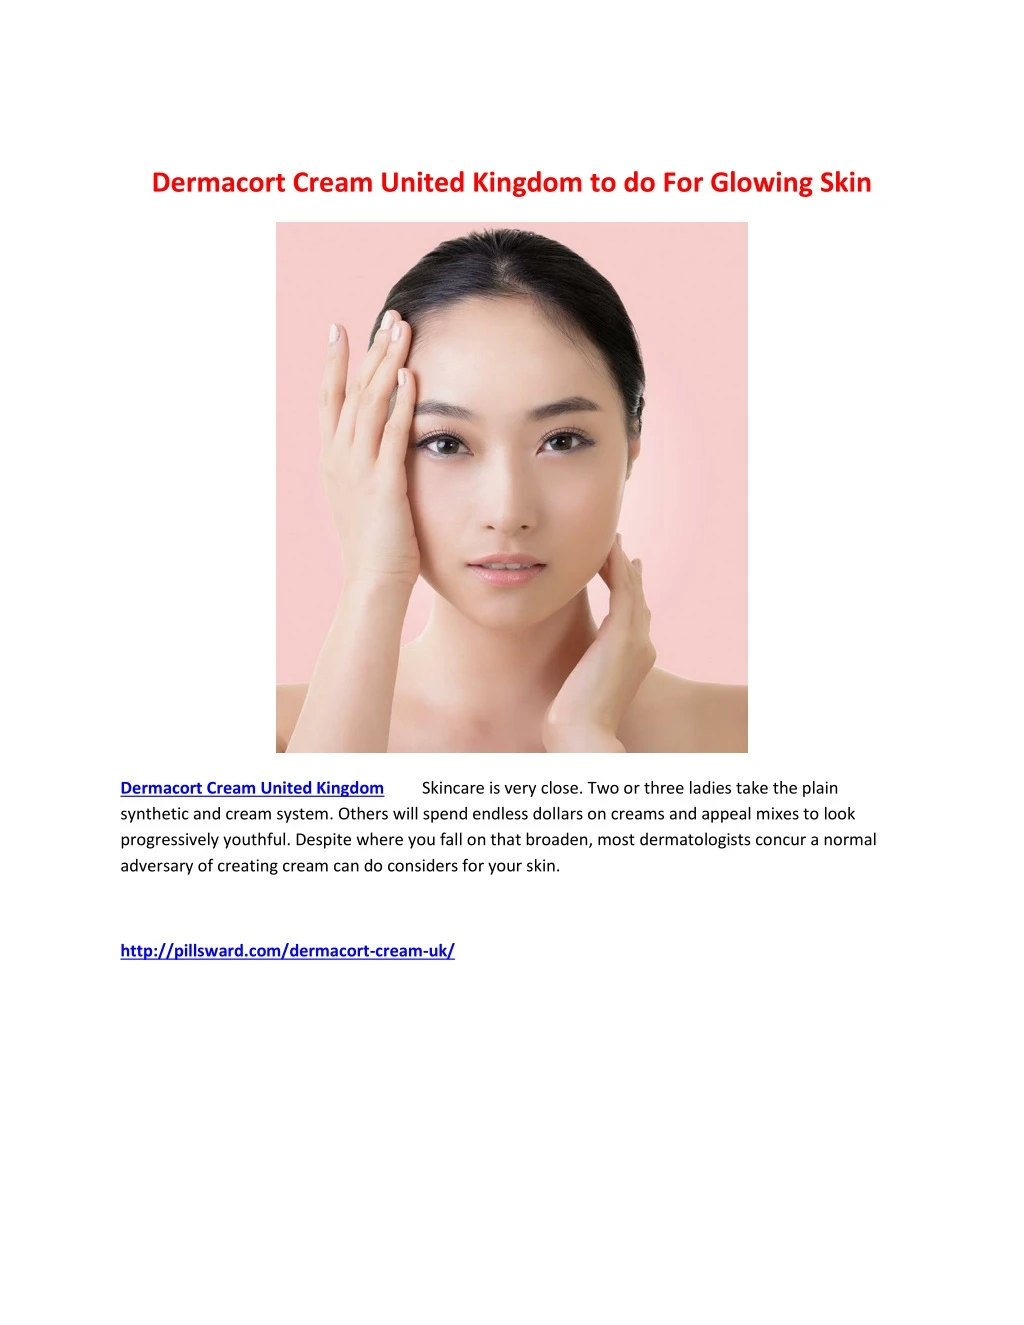 dermacort cream united kingdom to do for glowing